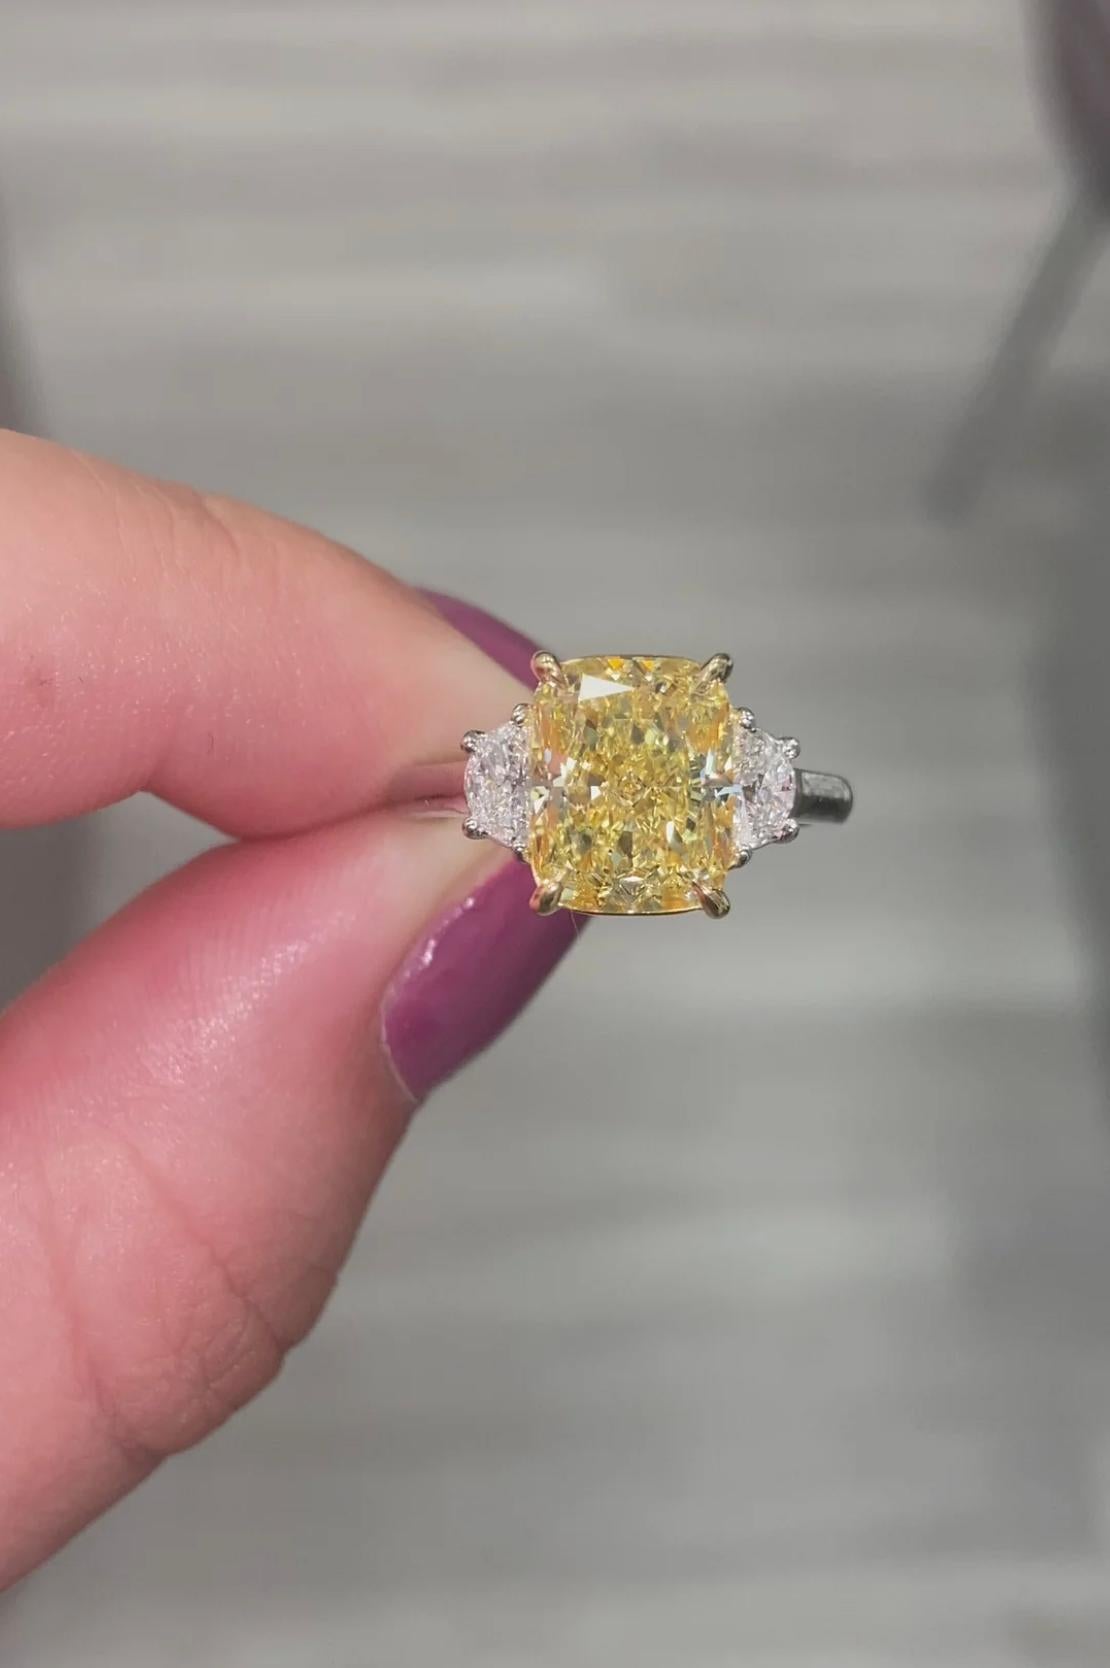 Beautiful fancy yellow elongated cushion cut with VVS clarity and excellent cutting in a three stone ring made of platinum yellow gold and colorless trapezoids
This piece can be viewed before purchase in our showroom in NYC or at one of our retail